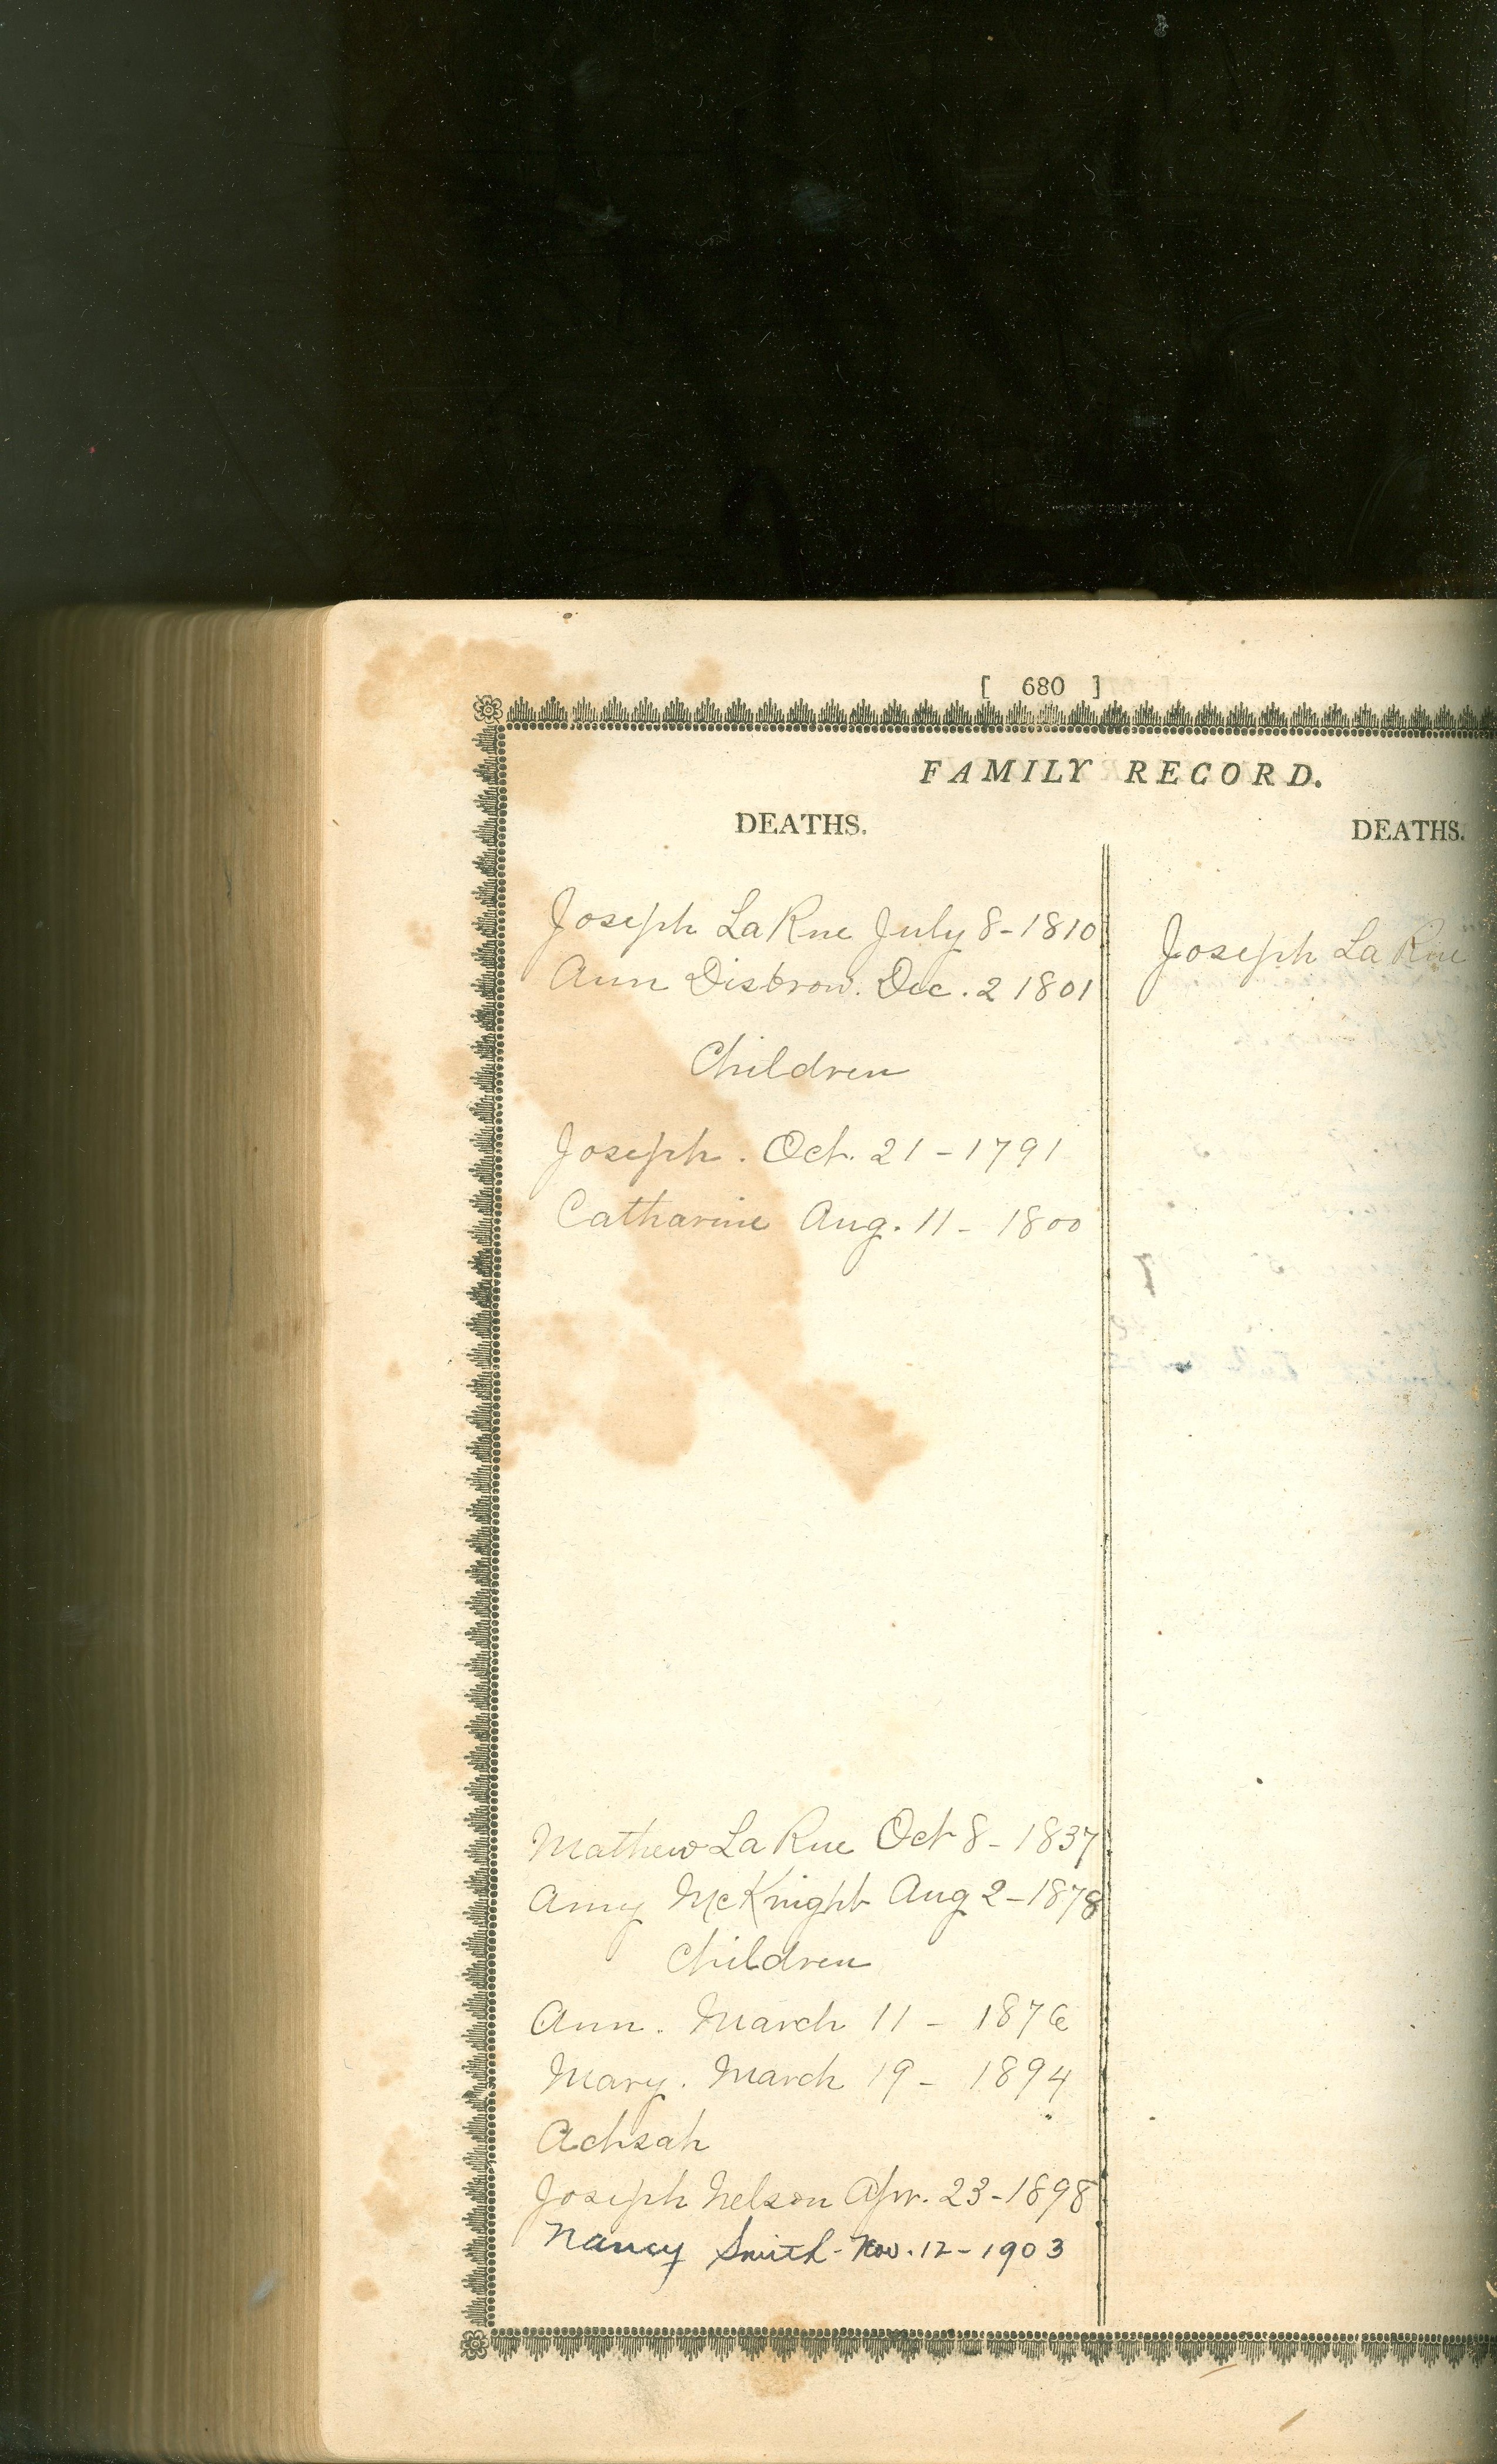 image of Joseph and Ann LaRue Bible Record, Deaths